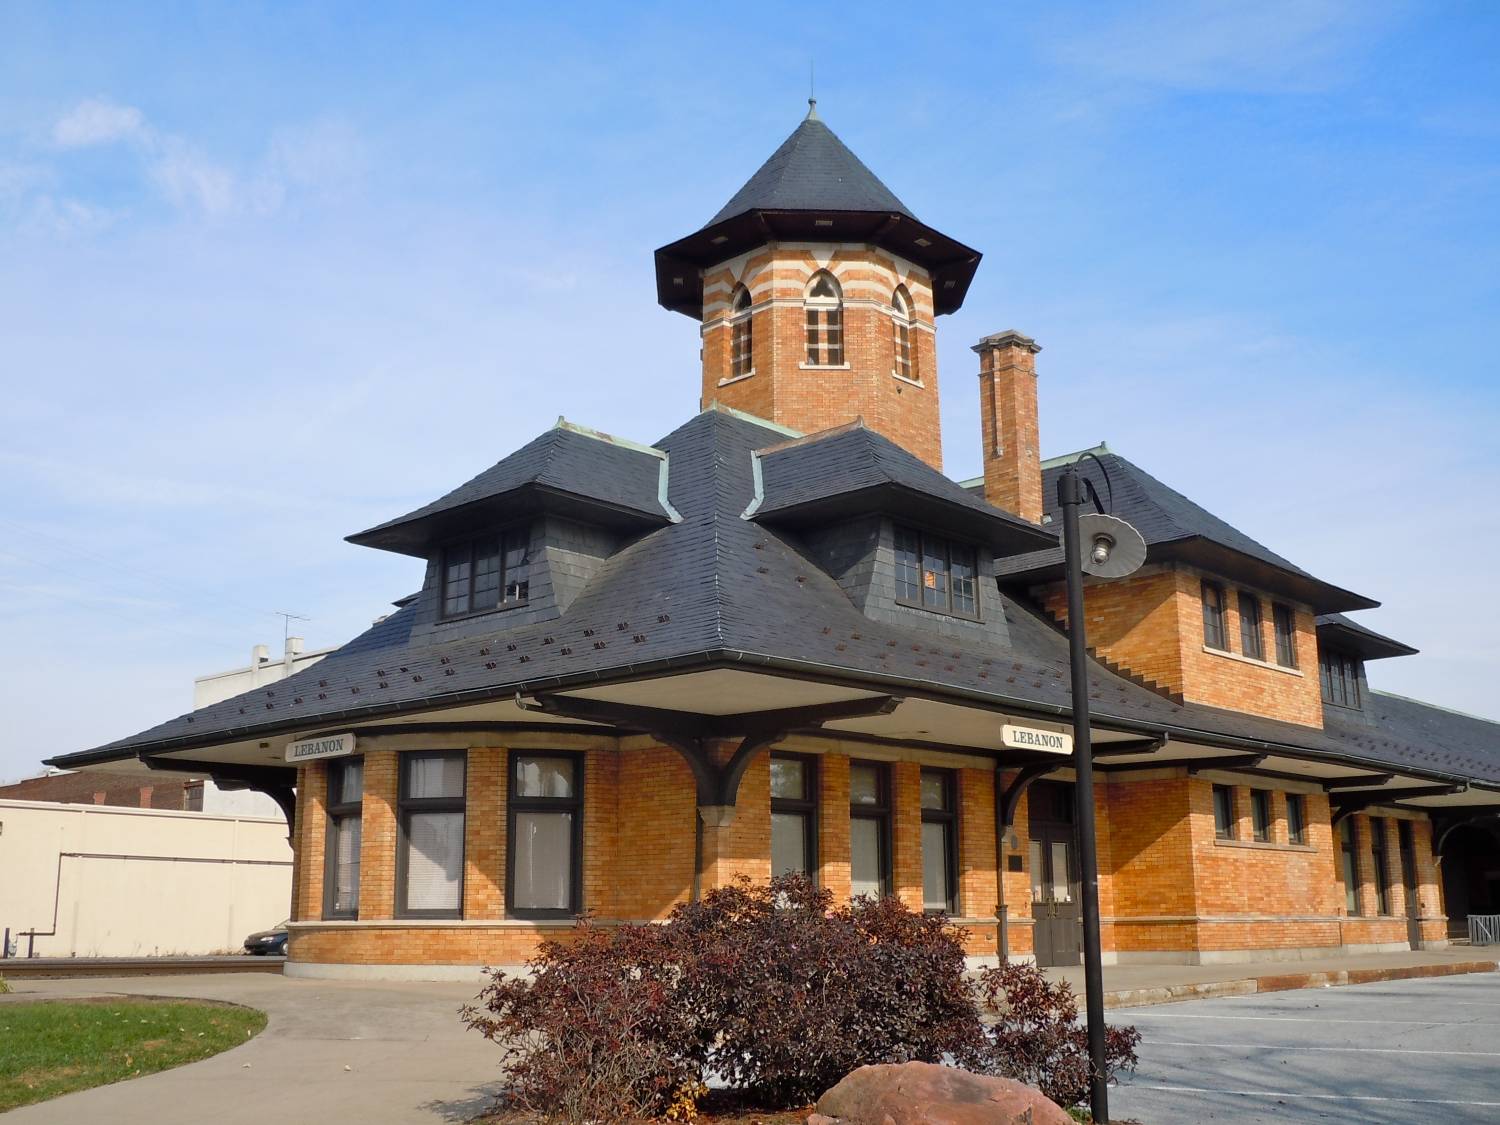 Lebanon - Reading Railroad station on Eighth Street - Photo Credit: By Smallbones - Own work, CC0, https://commons.wikimedia.org/w/index.php?curid=17360951